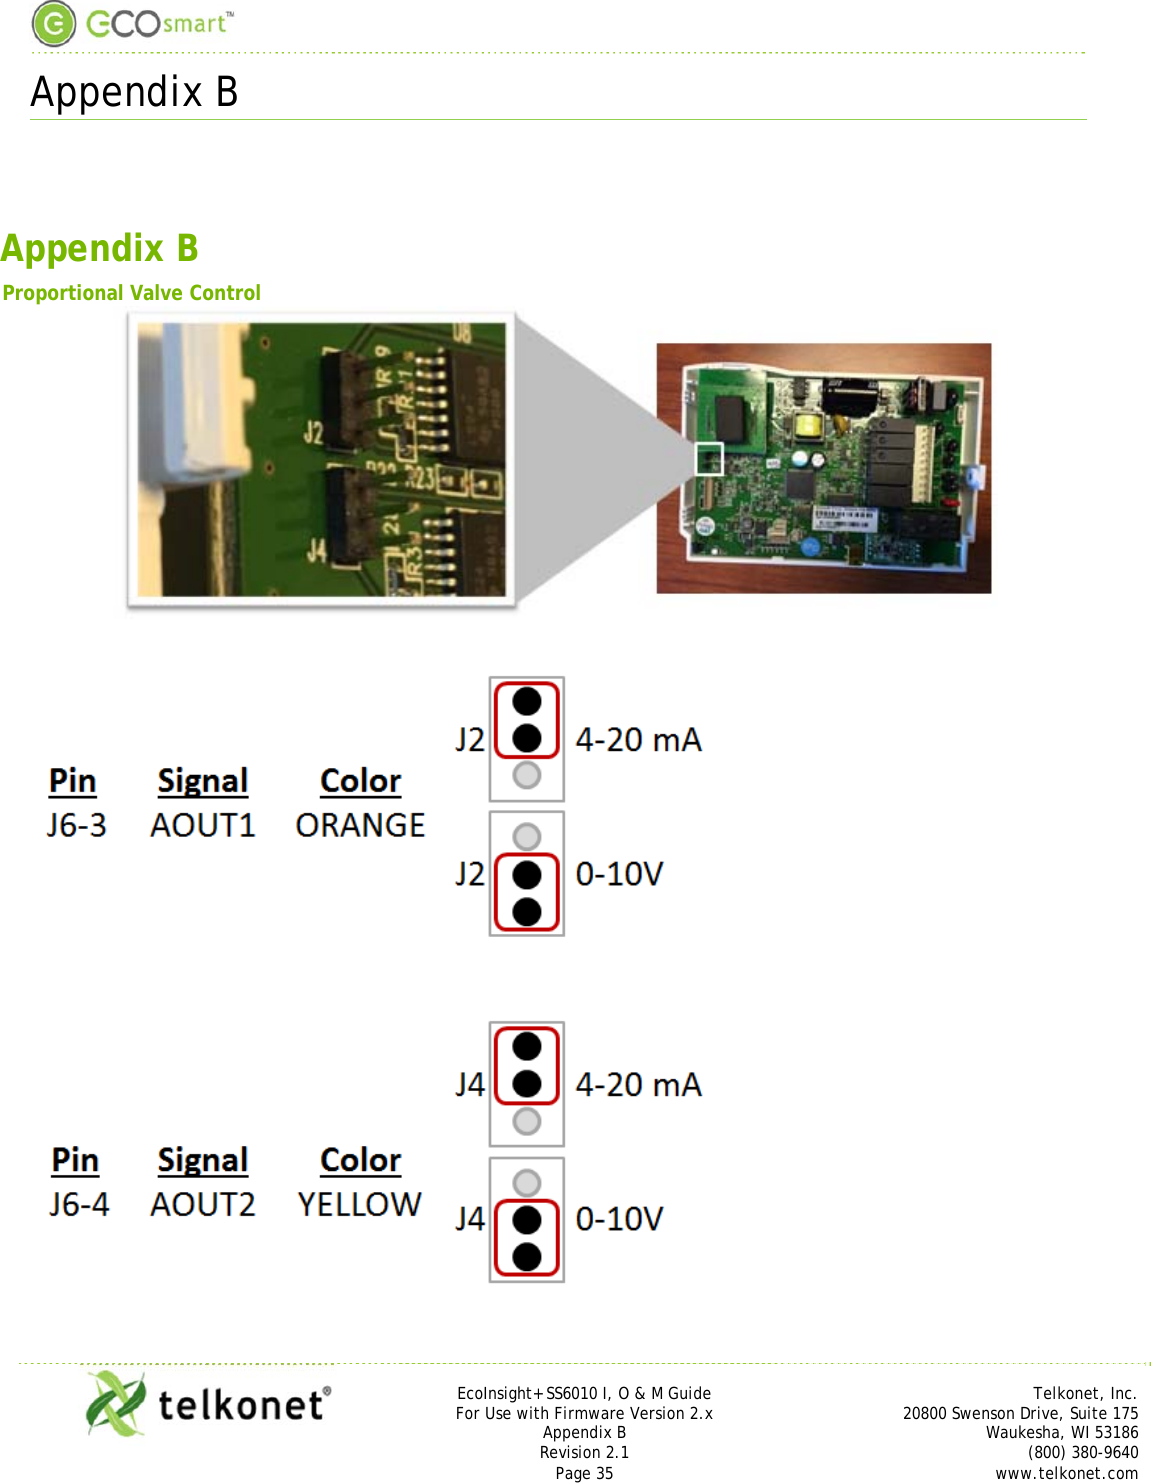  Appendix B     EcoInsight+ SS6010 I, O &amp; M Guide Telkonet, Inc. For Use with Firmware Version 2.x 20800 Swenson Drive, Suite 175 Appendix B Waukesha, WI 53186 Revision 2.1   (800) 380-9640 Page 35  www.telkonet.com   Appendix B  Proportional Valve Control     